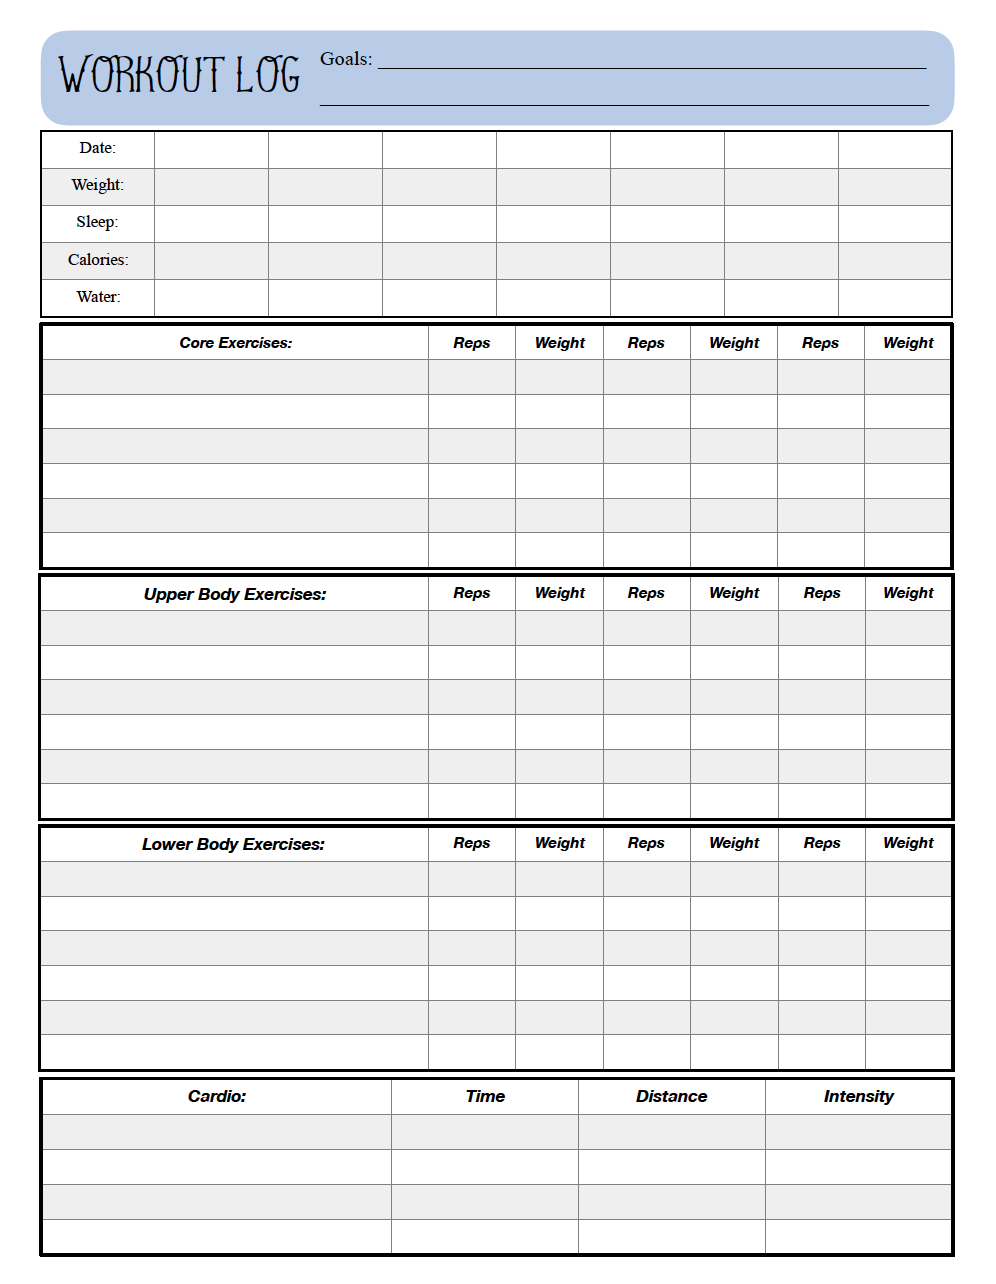 Free Printable Workout Logs: 3 Designs | Work Out Logs | Workout Log - Free Printable Workout Journal